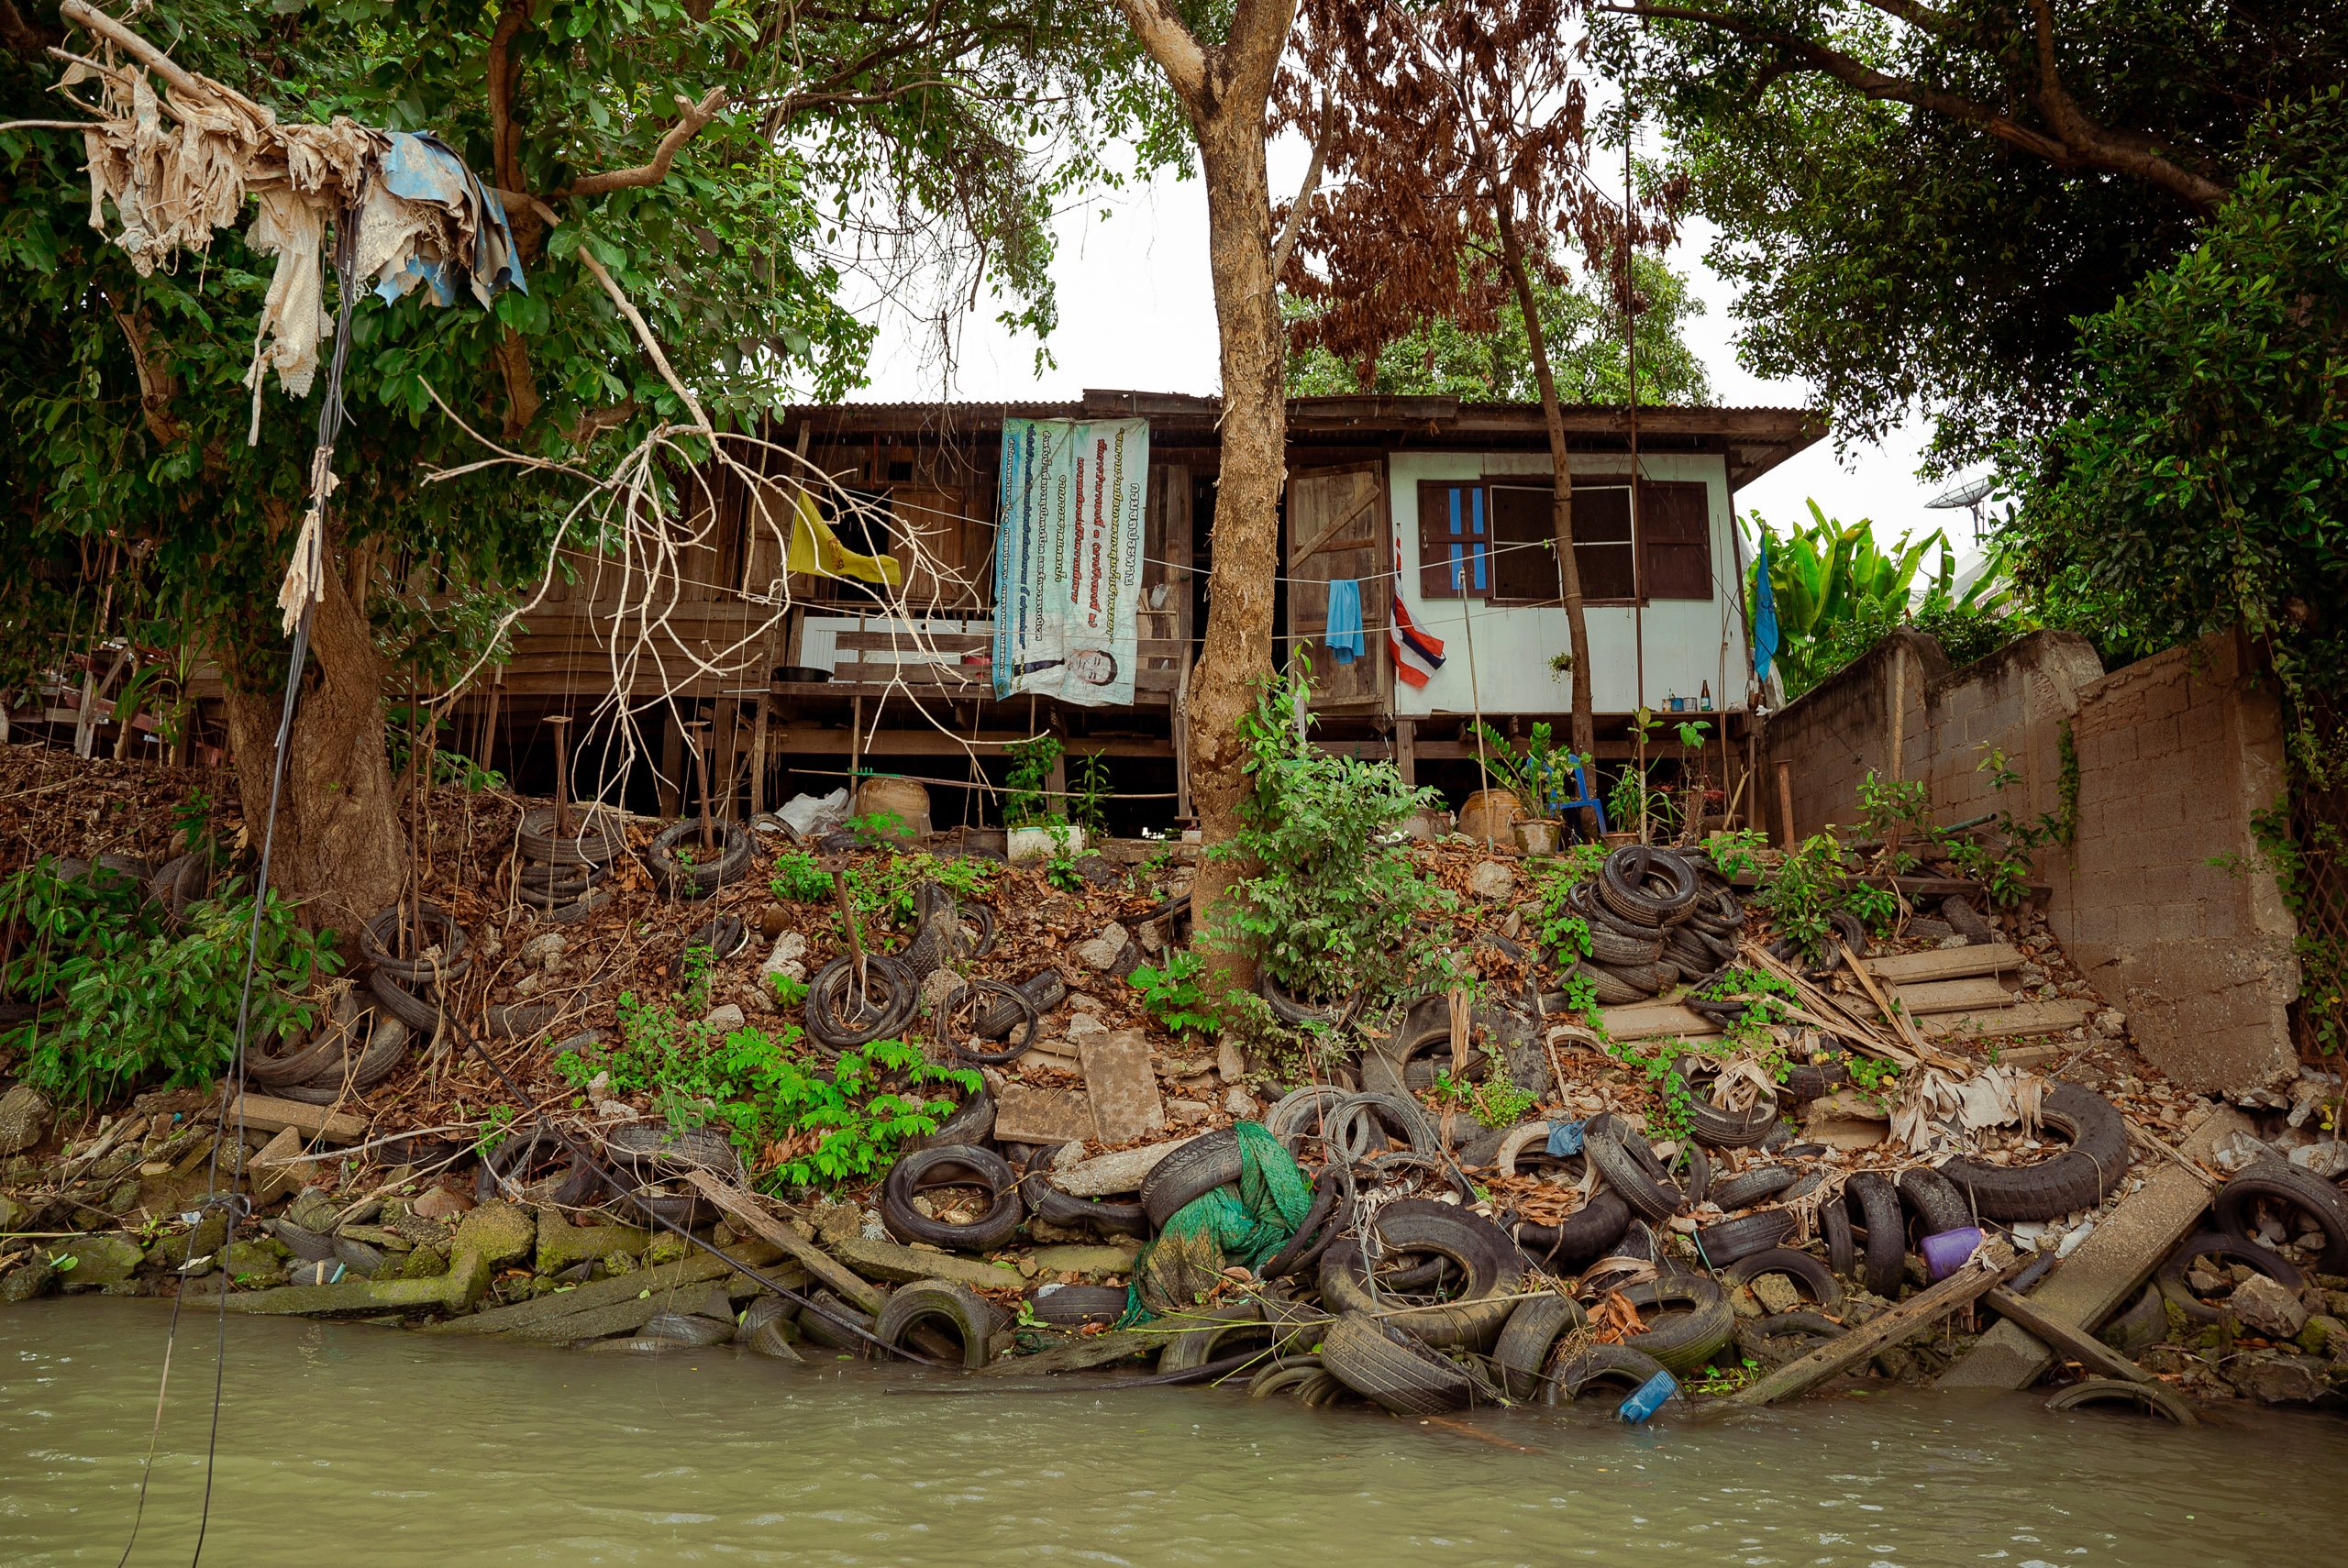 house on stilts near river with several old tyres at river's edge